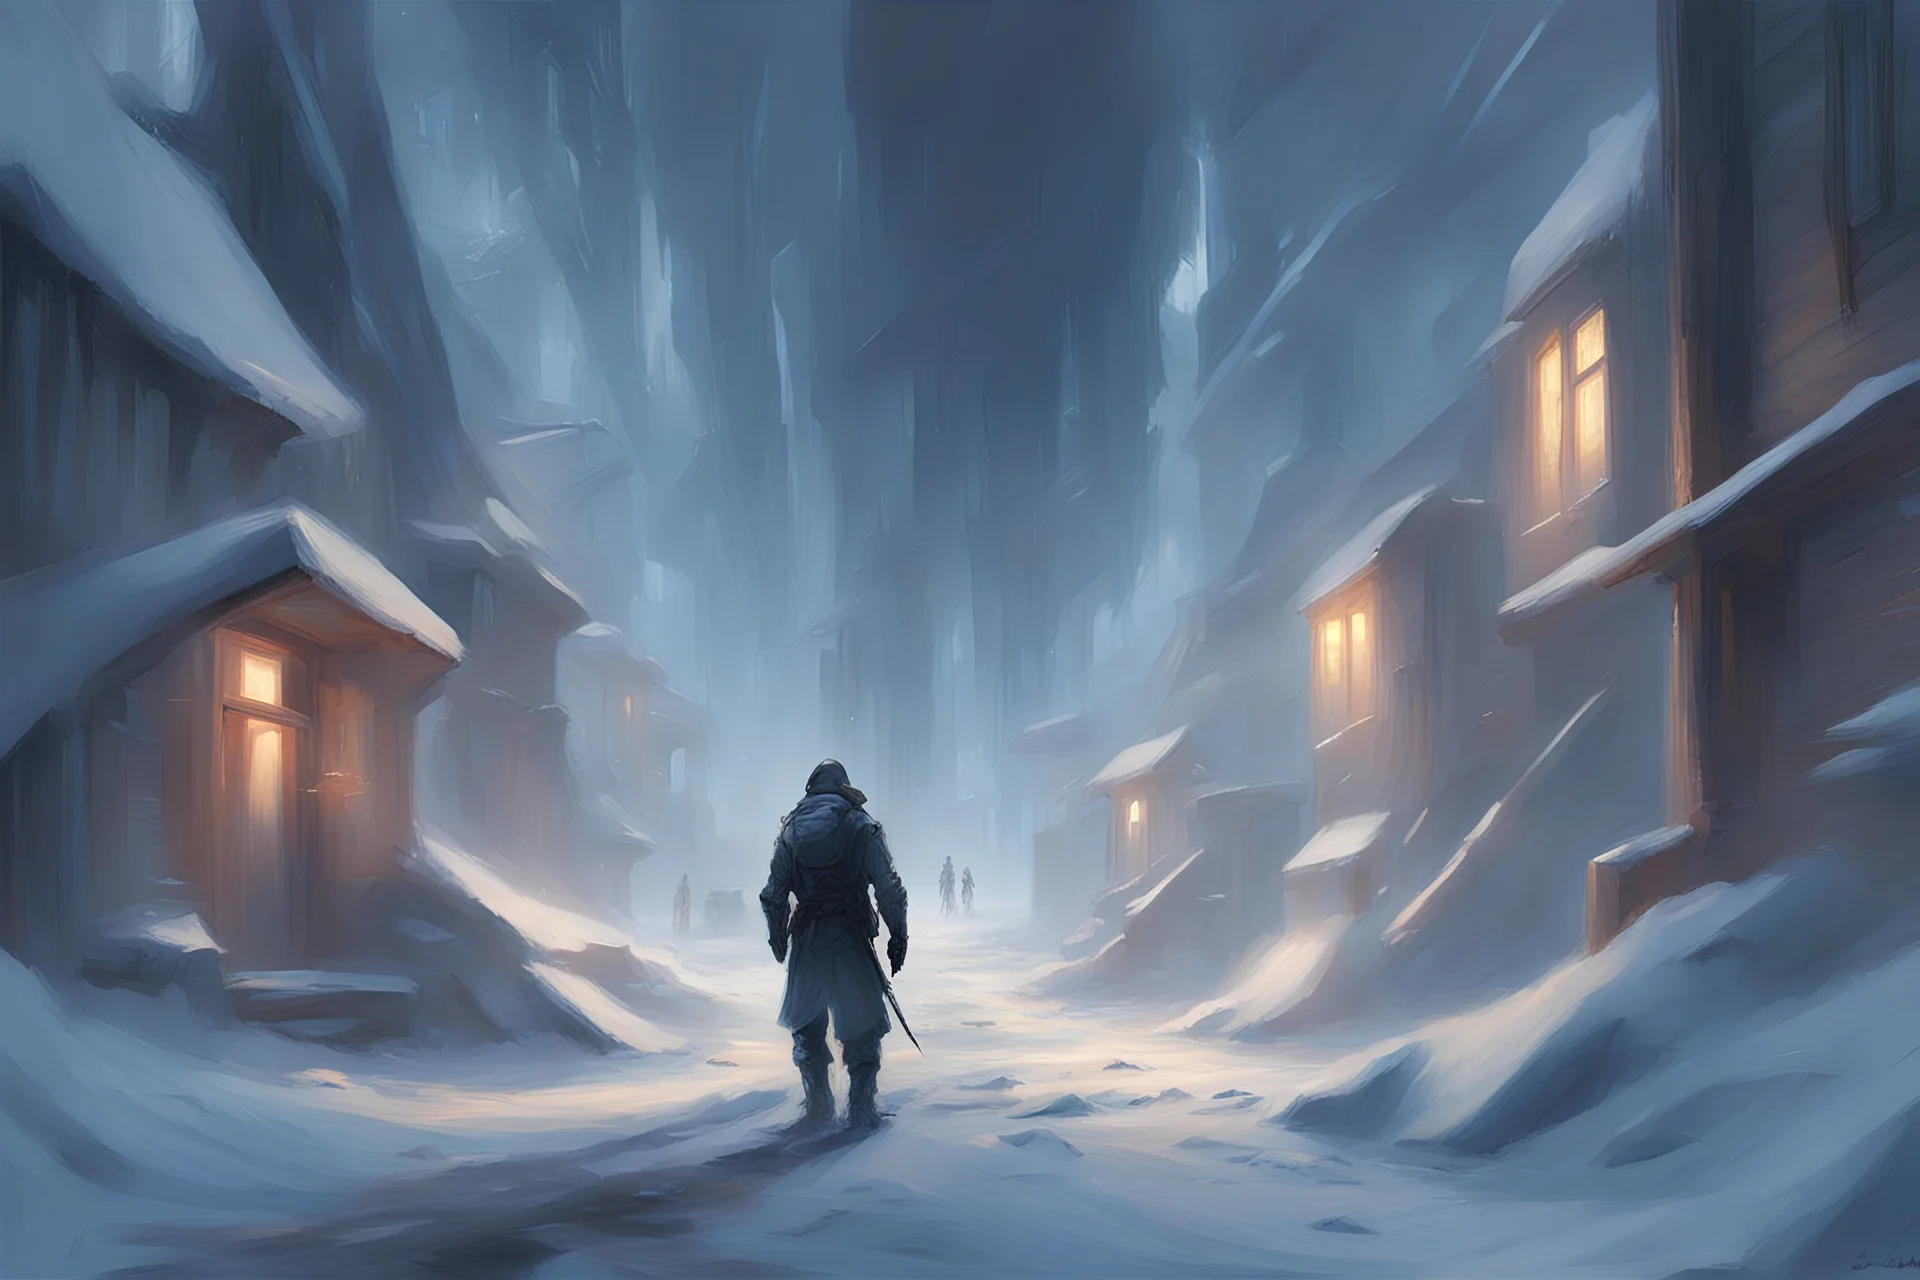 ice, night, mundo desconocido youtube channel influence, very epic and concept art, winter, sci-fi, futurism influence, winter, friedrich eckenfelder and jenny montigny impressionism paintings